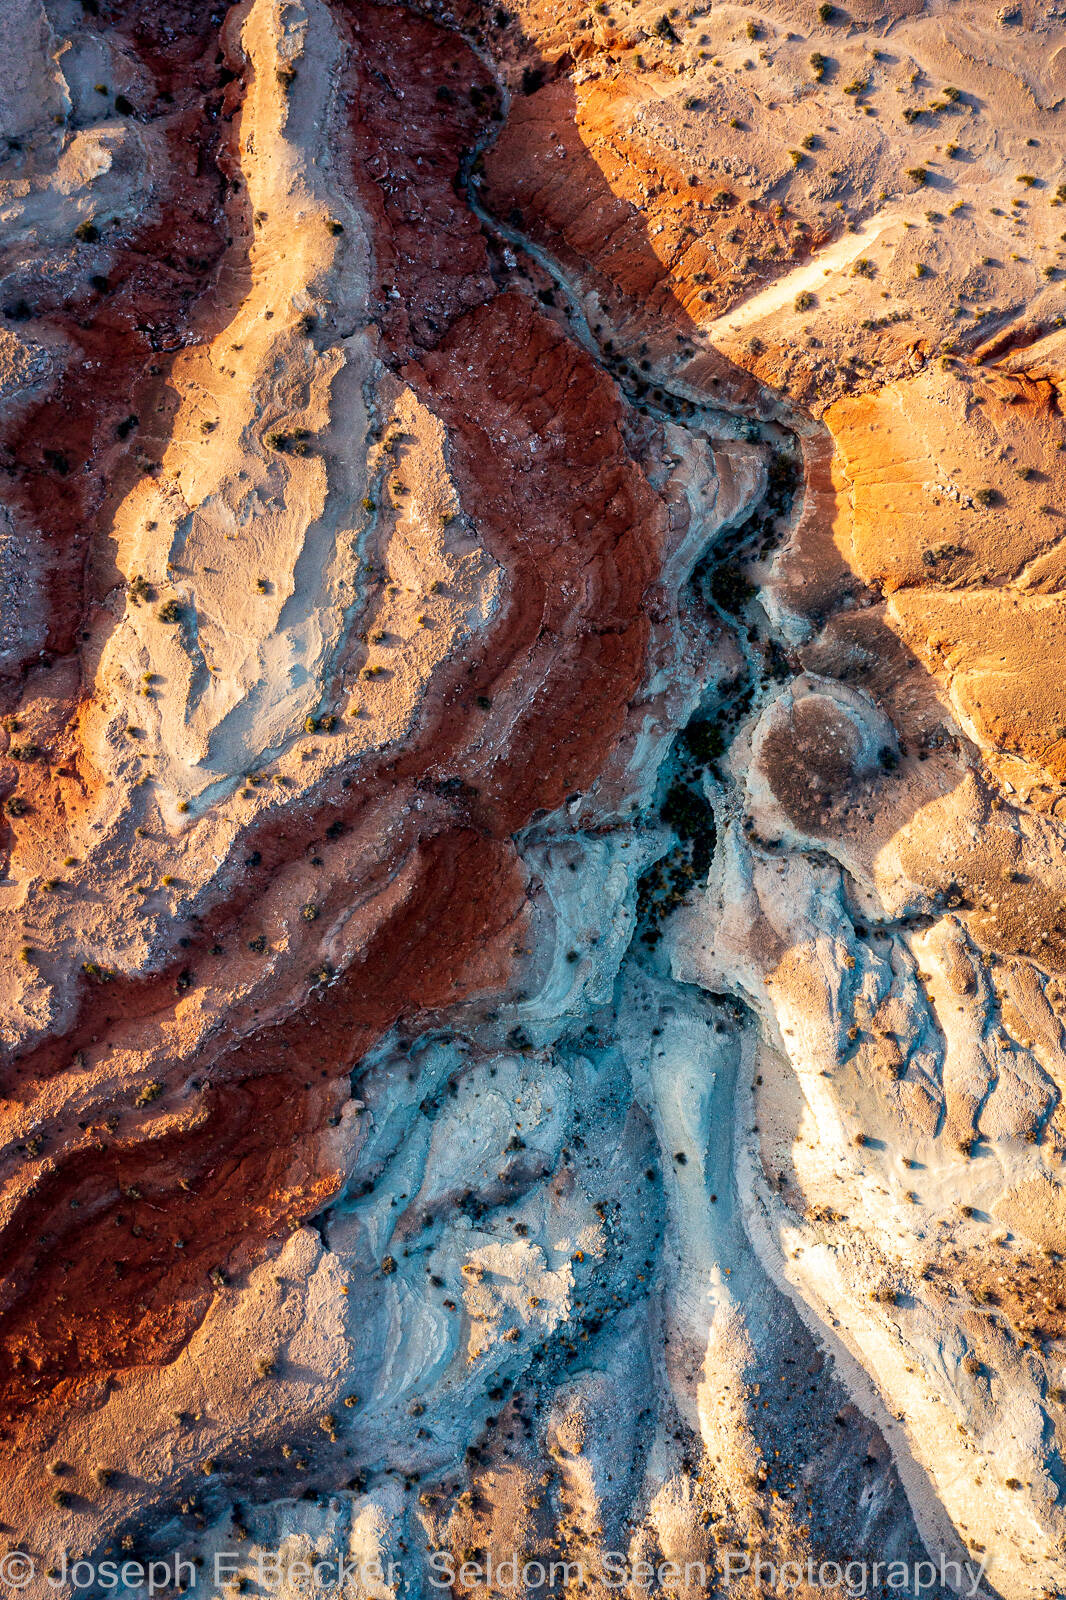 Image of Goblin Valley State Park - Wild Horse Road by Joe Becker